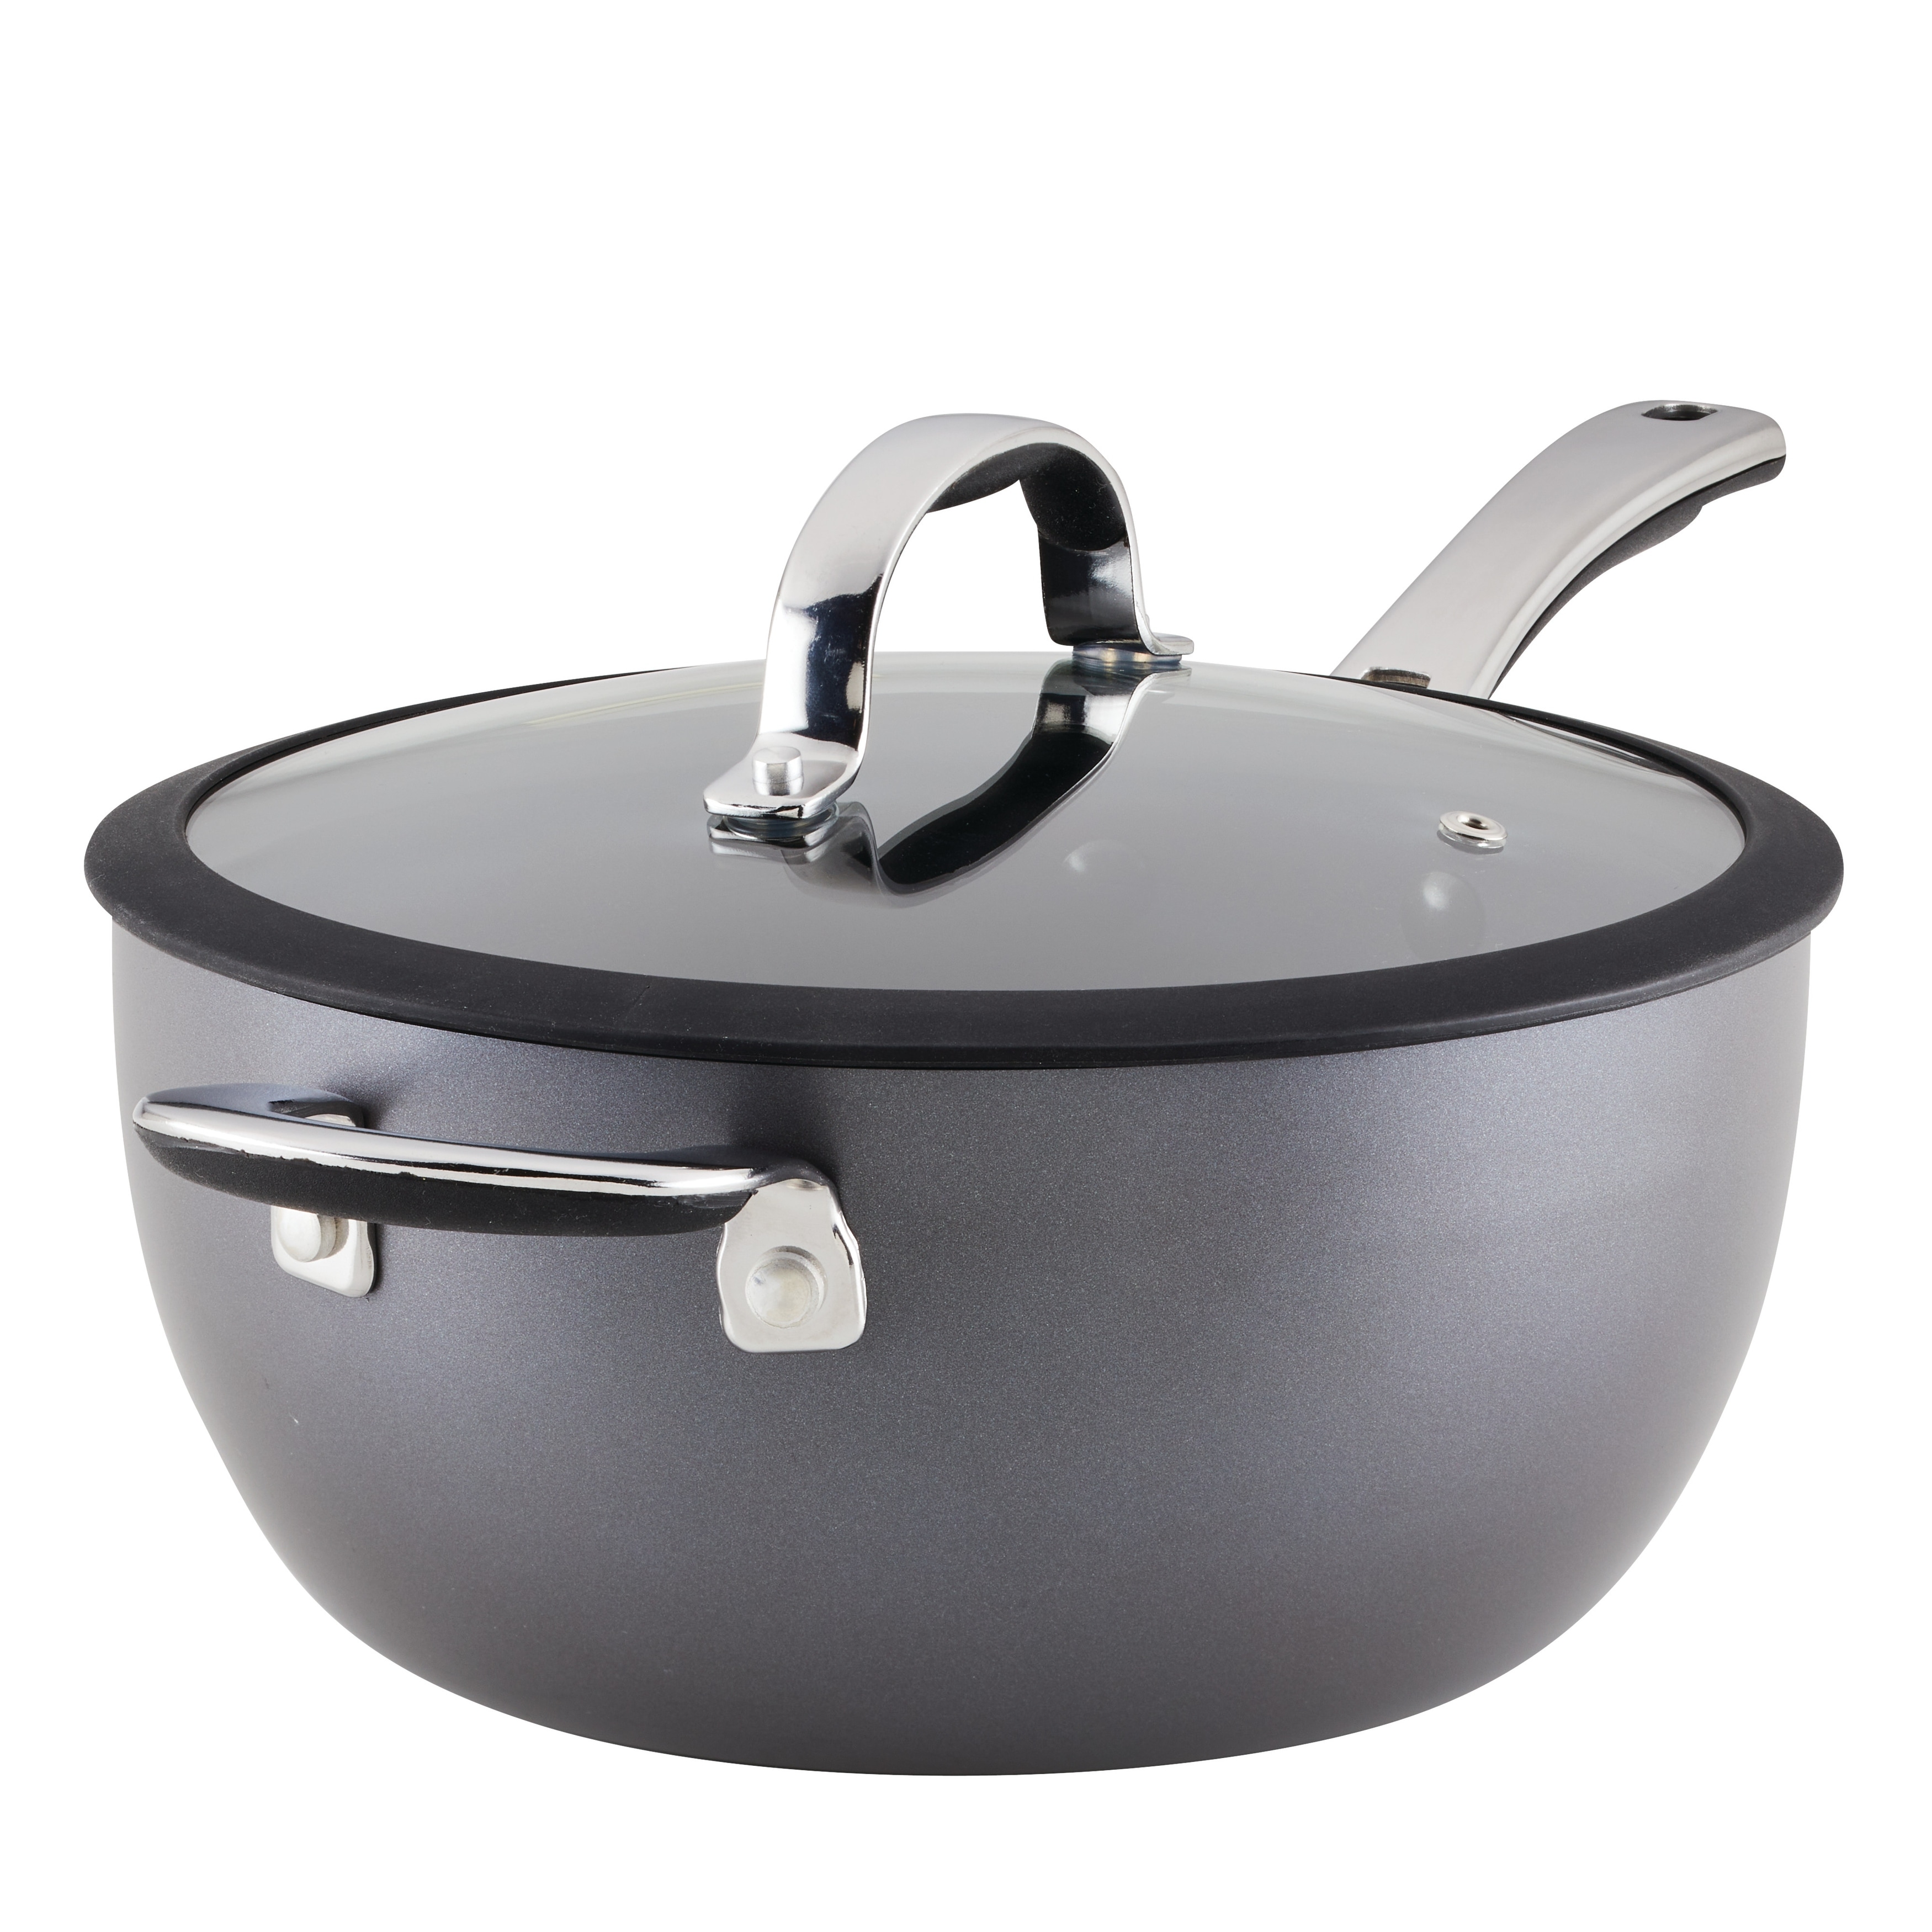 https://ak1.ostkcdn.com/images/products/is/images/direct/7b51ce75a7eb396361df1f8fae8ab52b9b38ff89/Rachael-Ray-Cook-%2B-Create-Hard-Anodized-Nonstick-Saucier-Sauce-Pan-with-Lid-and-Helper-Handle%2C-4.5-Quart%2C-Black.jpg